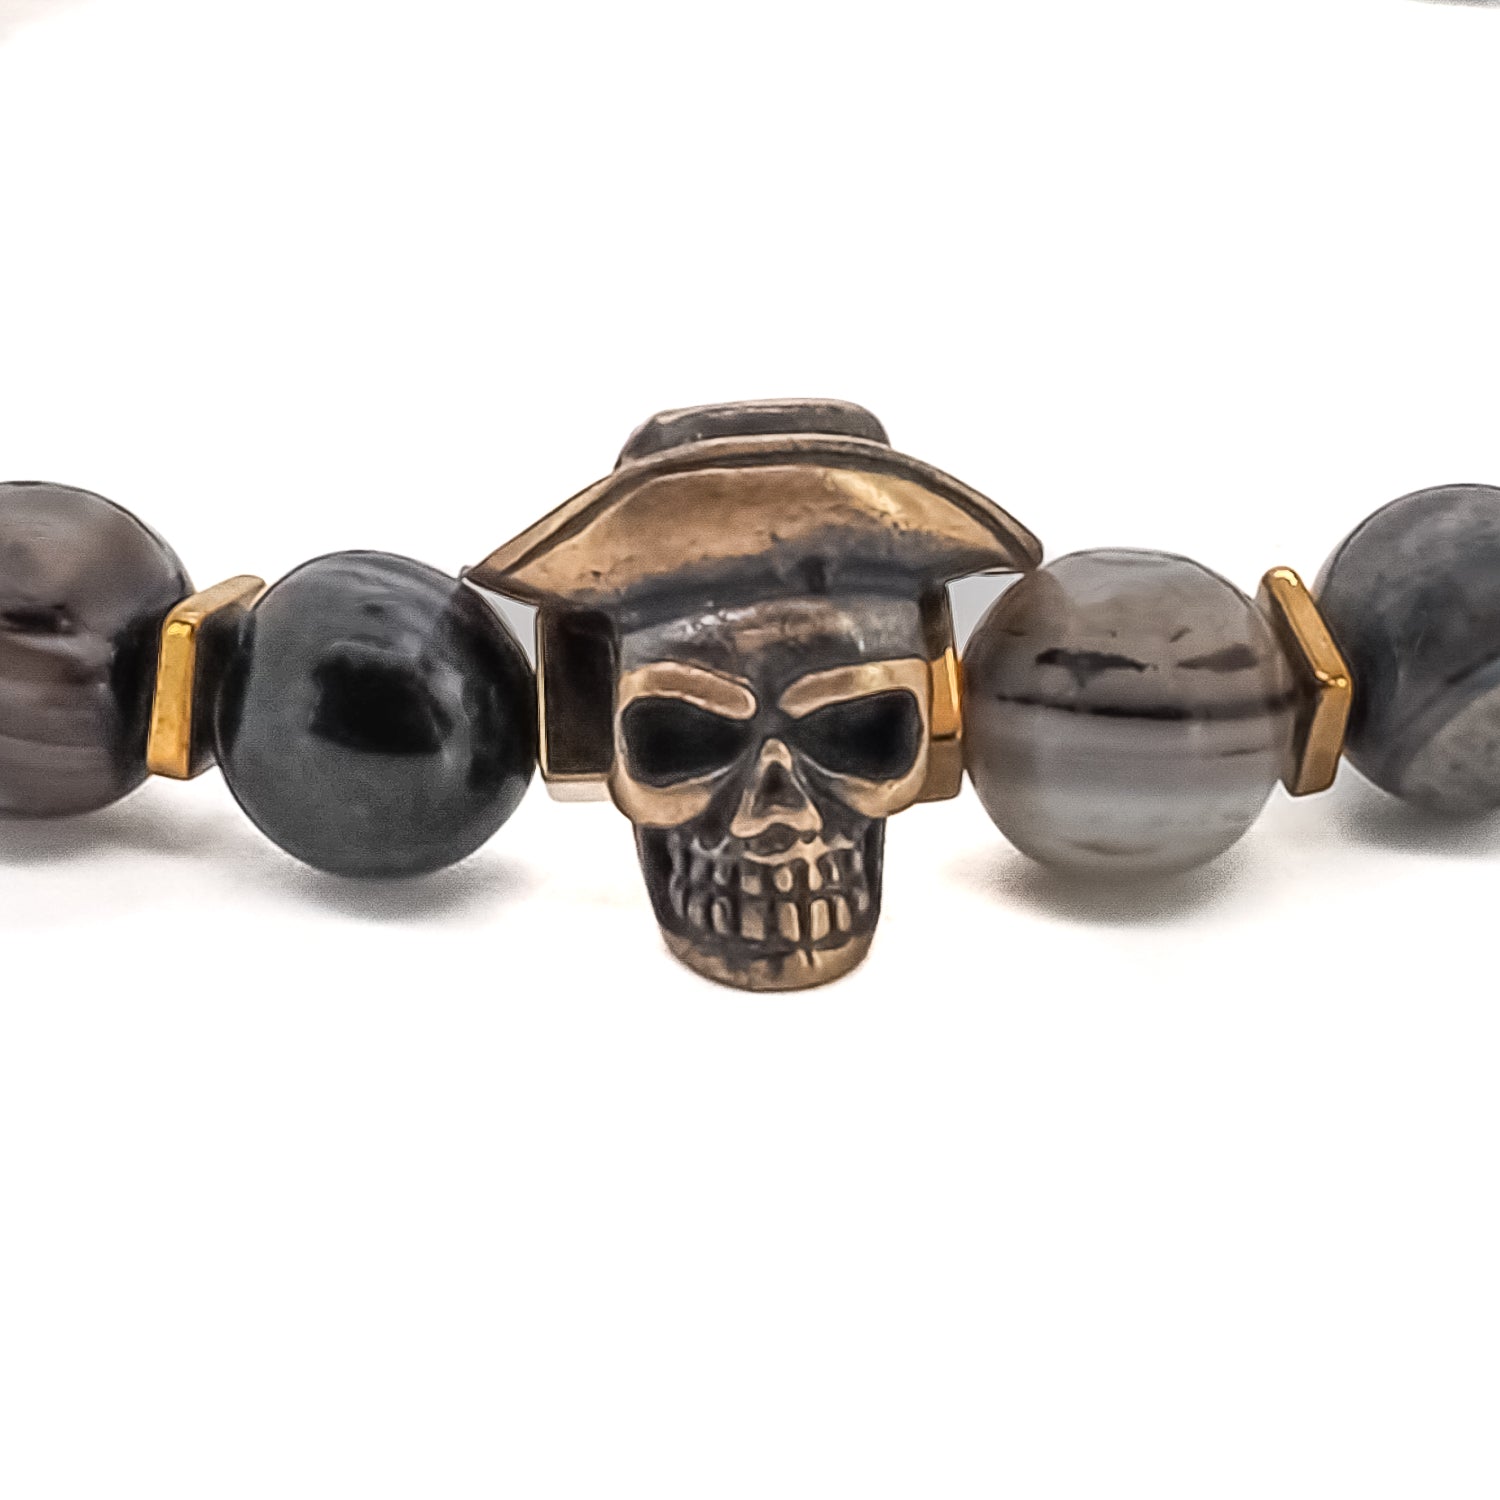 Make a bold statement with the Cowboy Hat Skull Agate Bracelet. Handcrafted with Agate stone beads, gold hematite spacers, and a bronze cowboy hat skull charm, this unique piece of jewelry is perfect for men who want to stand out from the crowd.